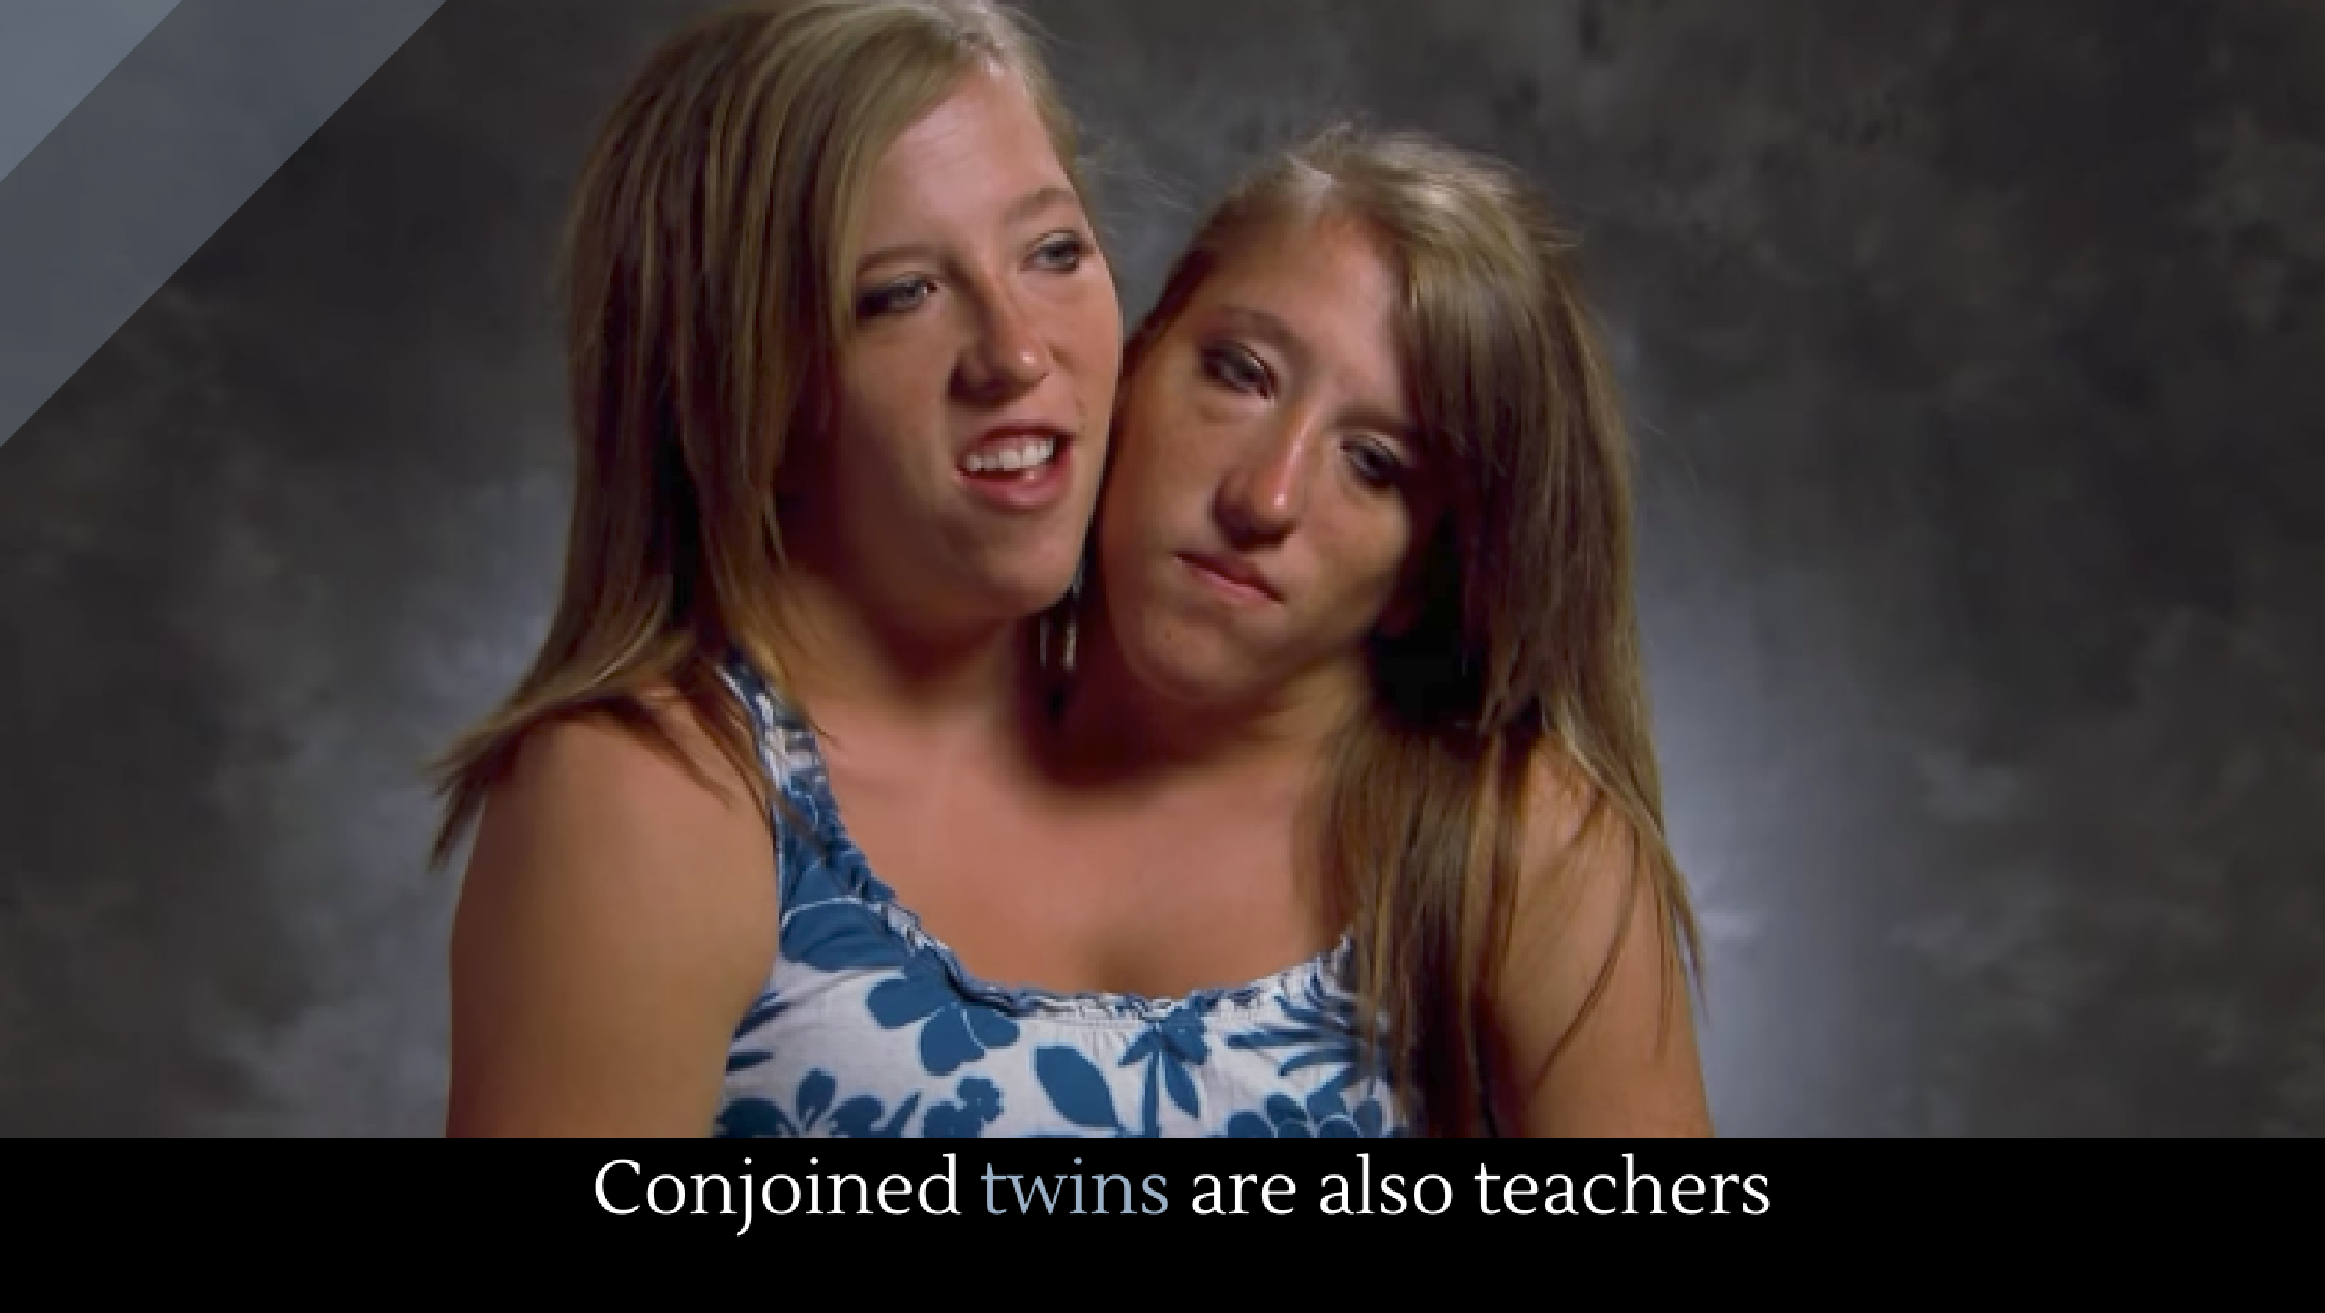 Abby and Brittany Hensel might be the most interesting teachers on the plan...